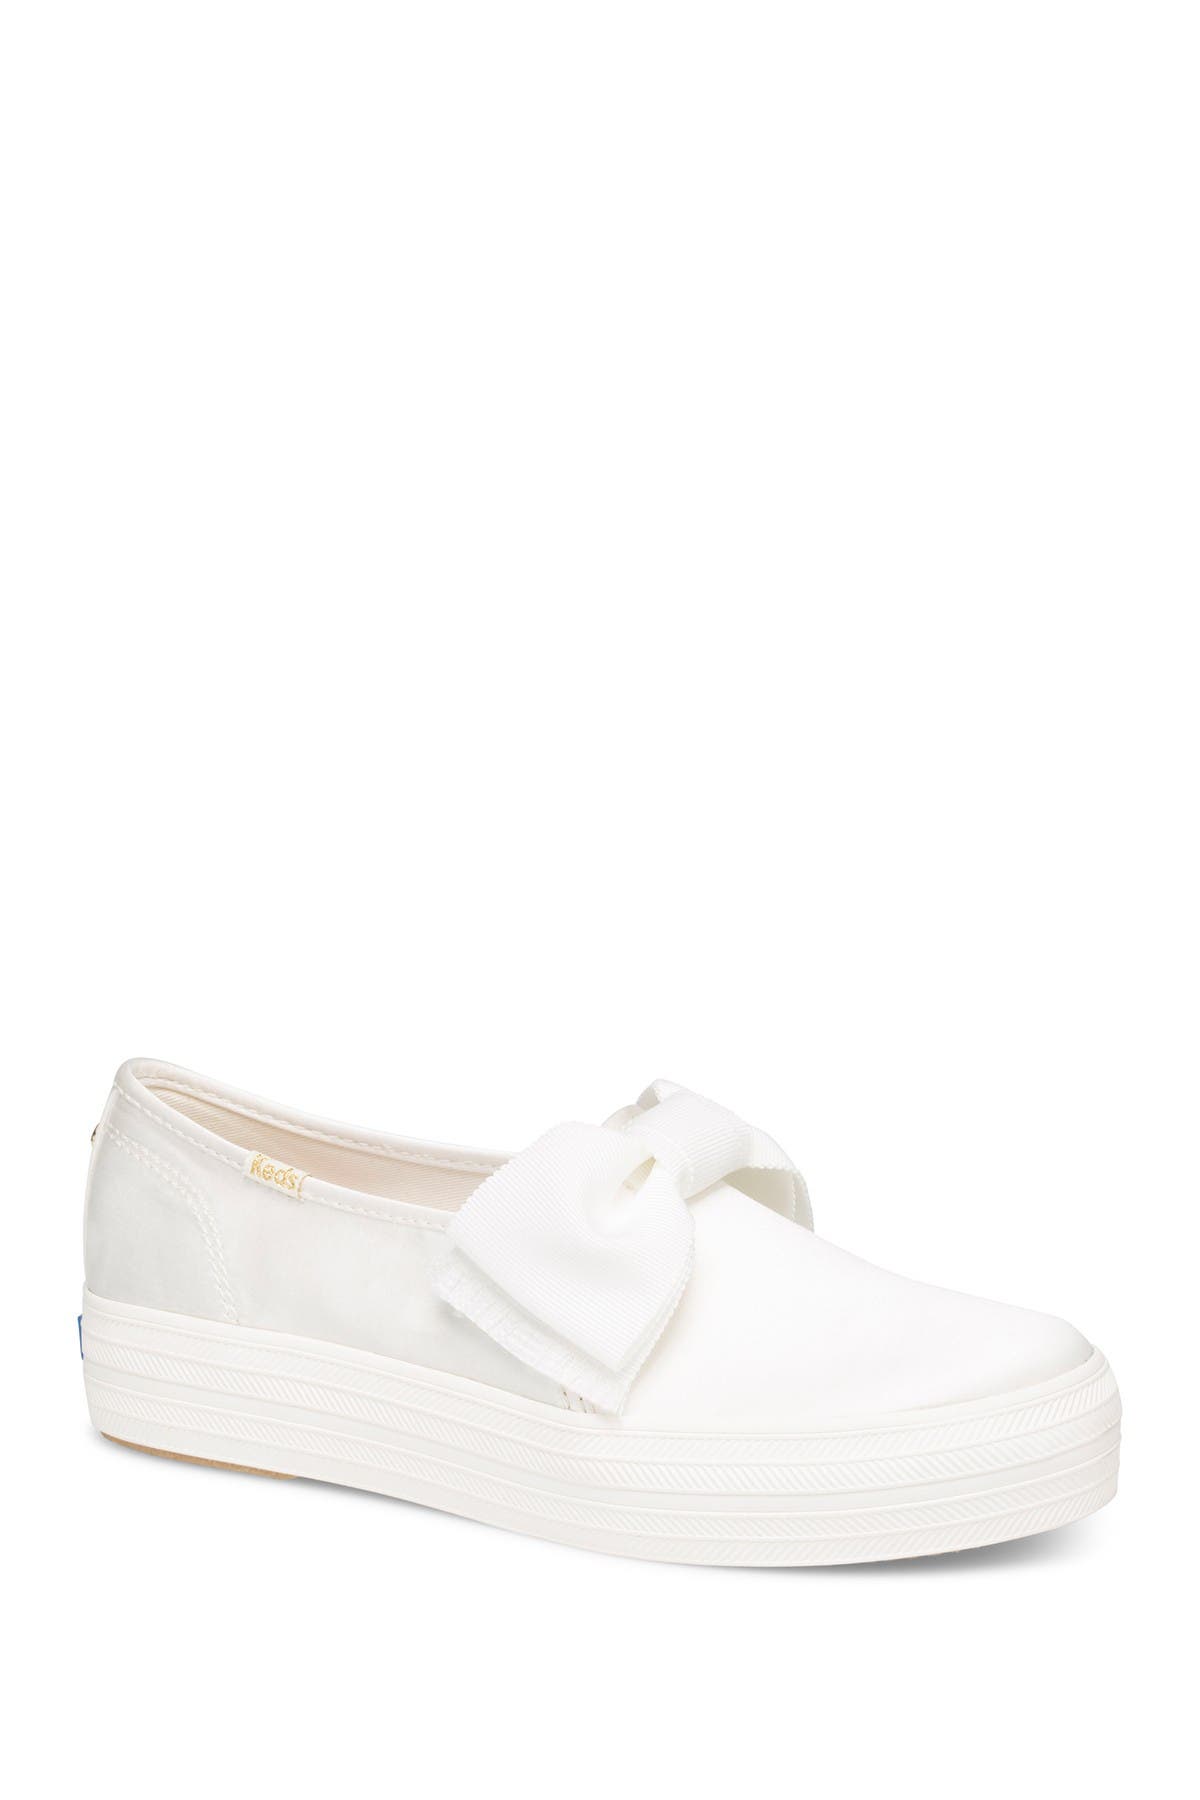 Kate Spade Keds Platform Online Hotsell, UP TO 63% OFF | www 